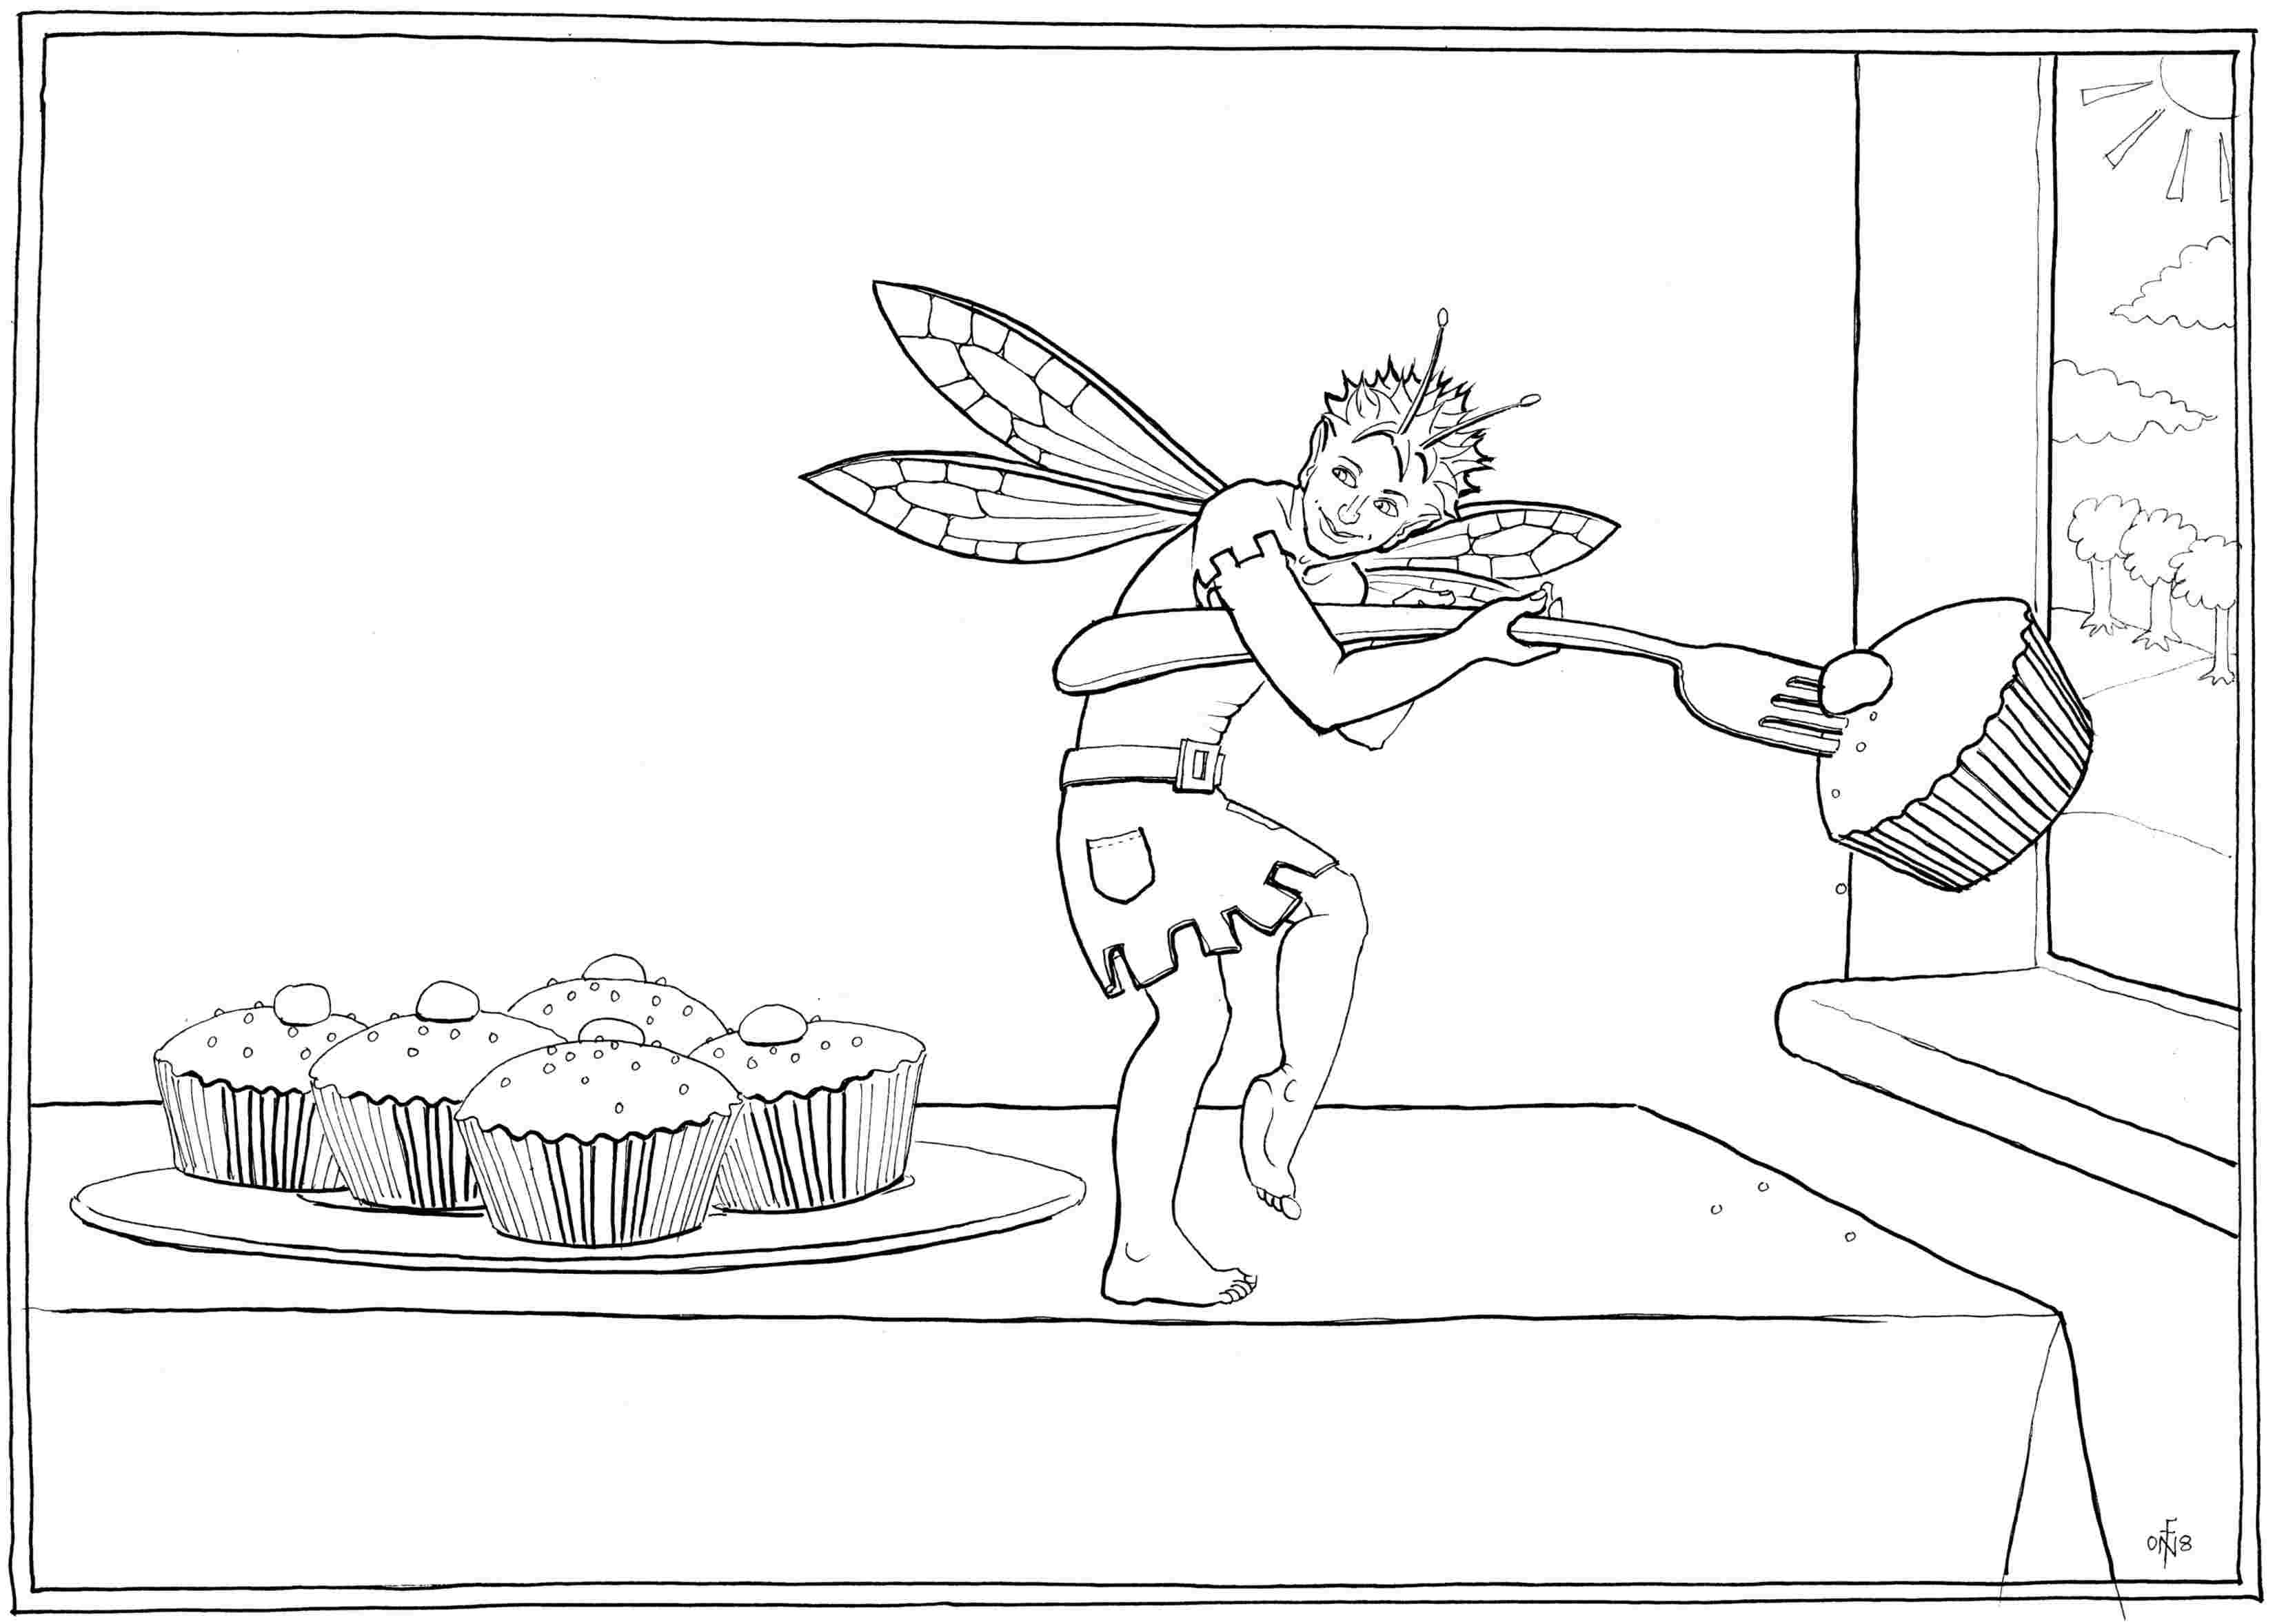 Fairycake Thief - colouring-in drawing - to download, right click and save, print out and colour in!